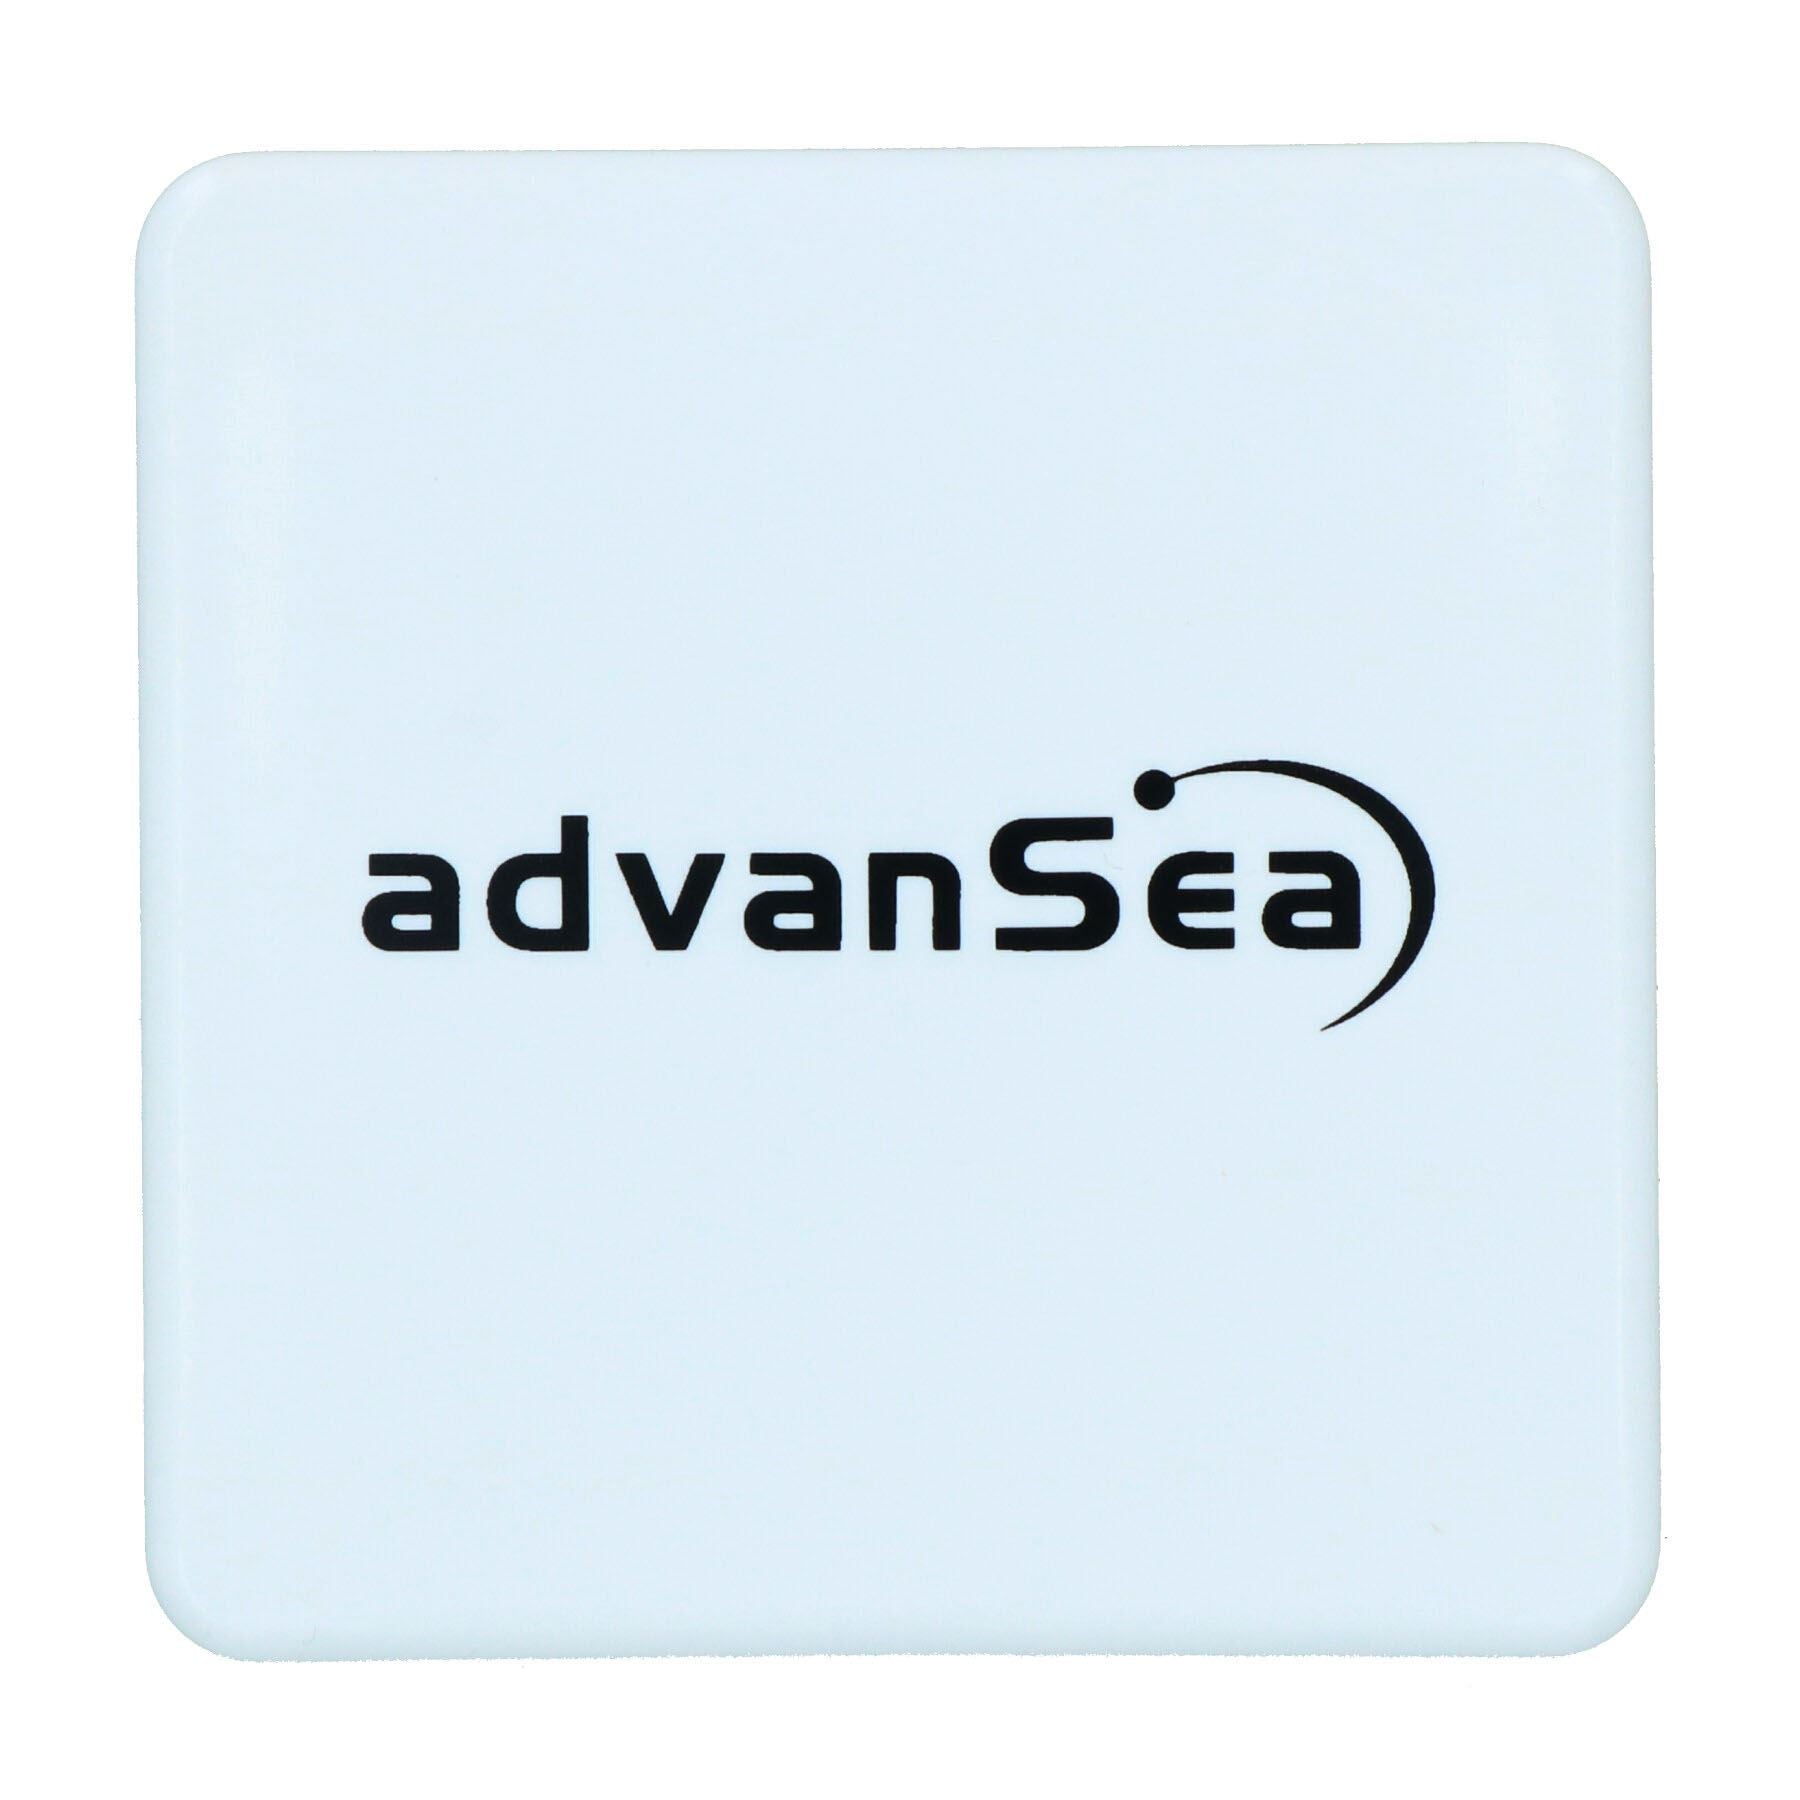 Replacement Sun Cover for AdvanSea Marine Electronics Instruments by Plastimo